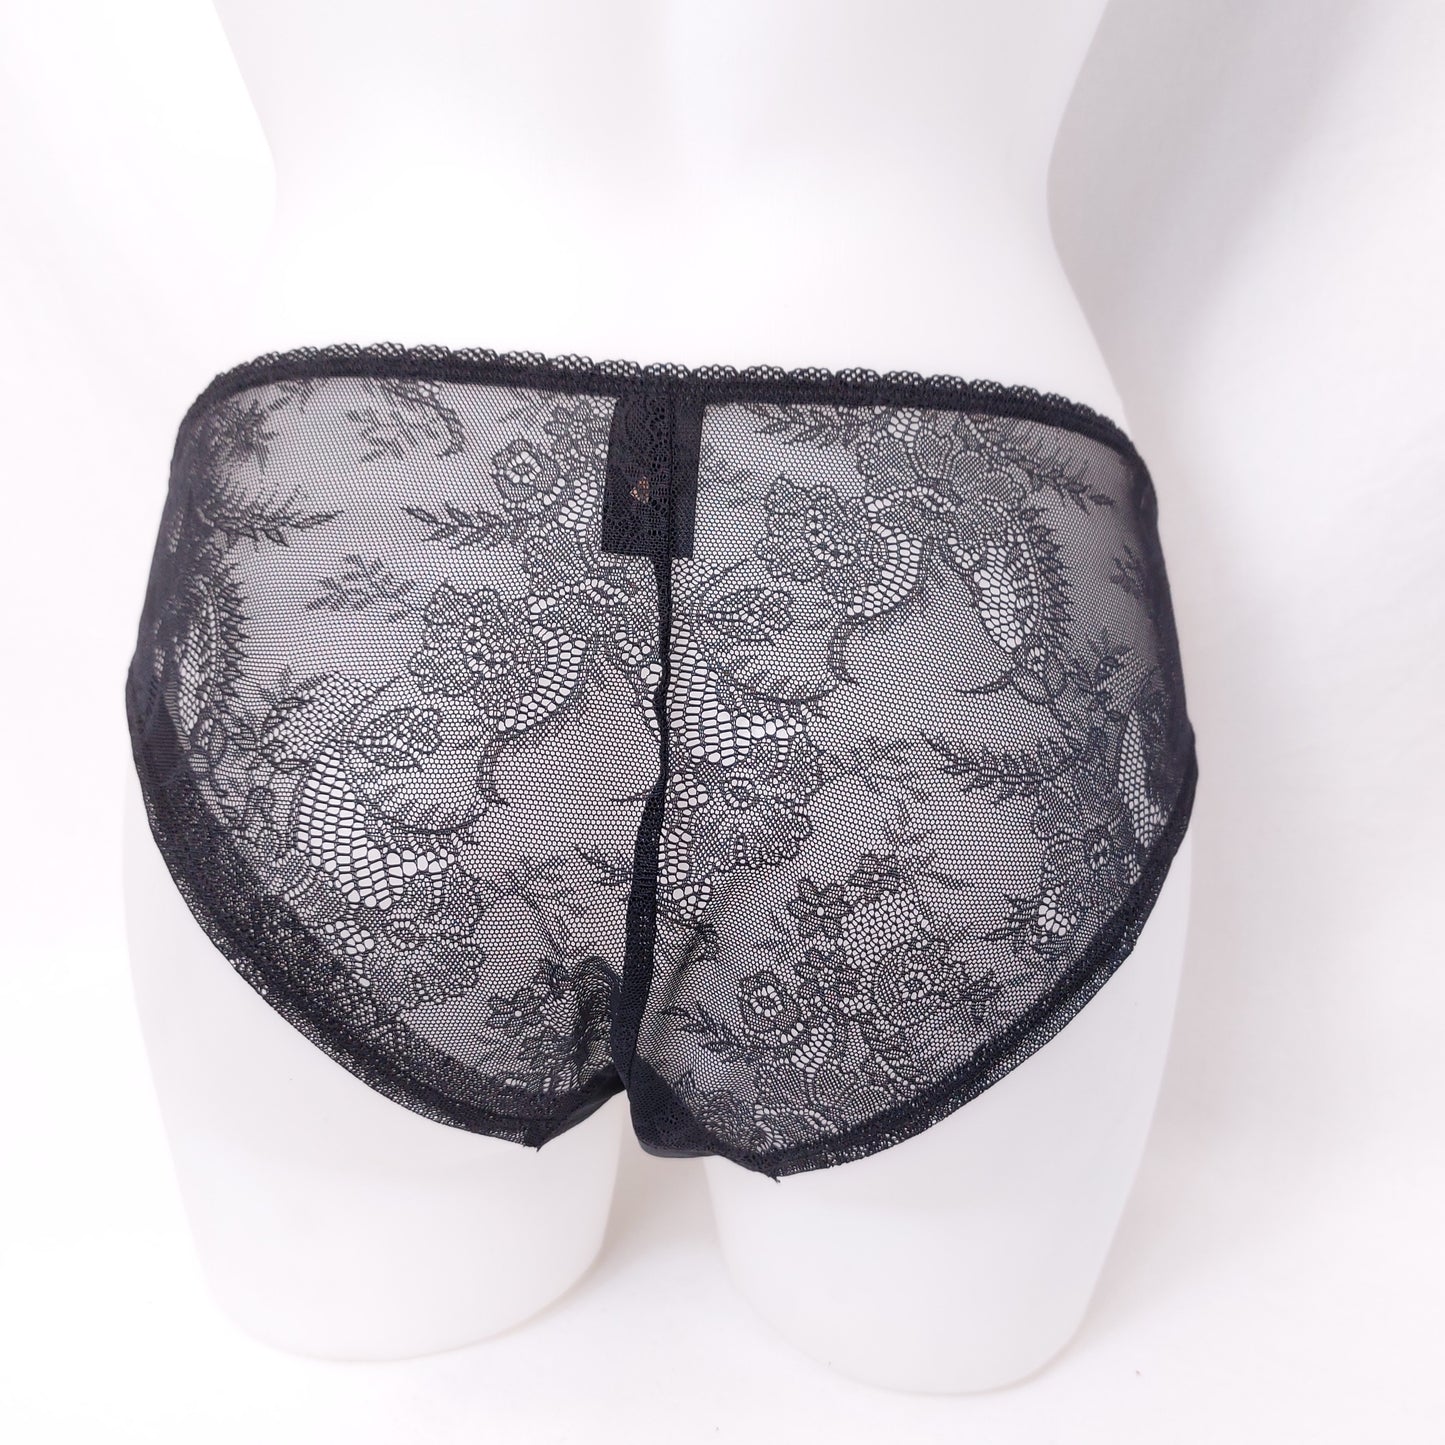 Black Cream Lace Brief Knickers 3xPairs